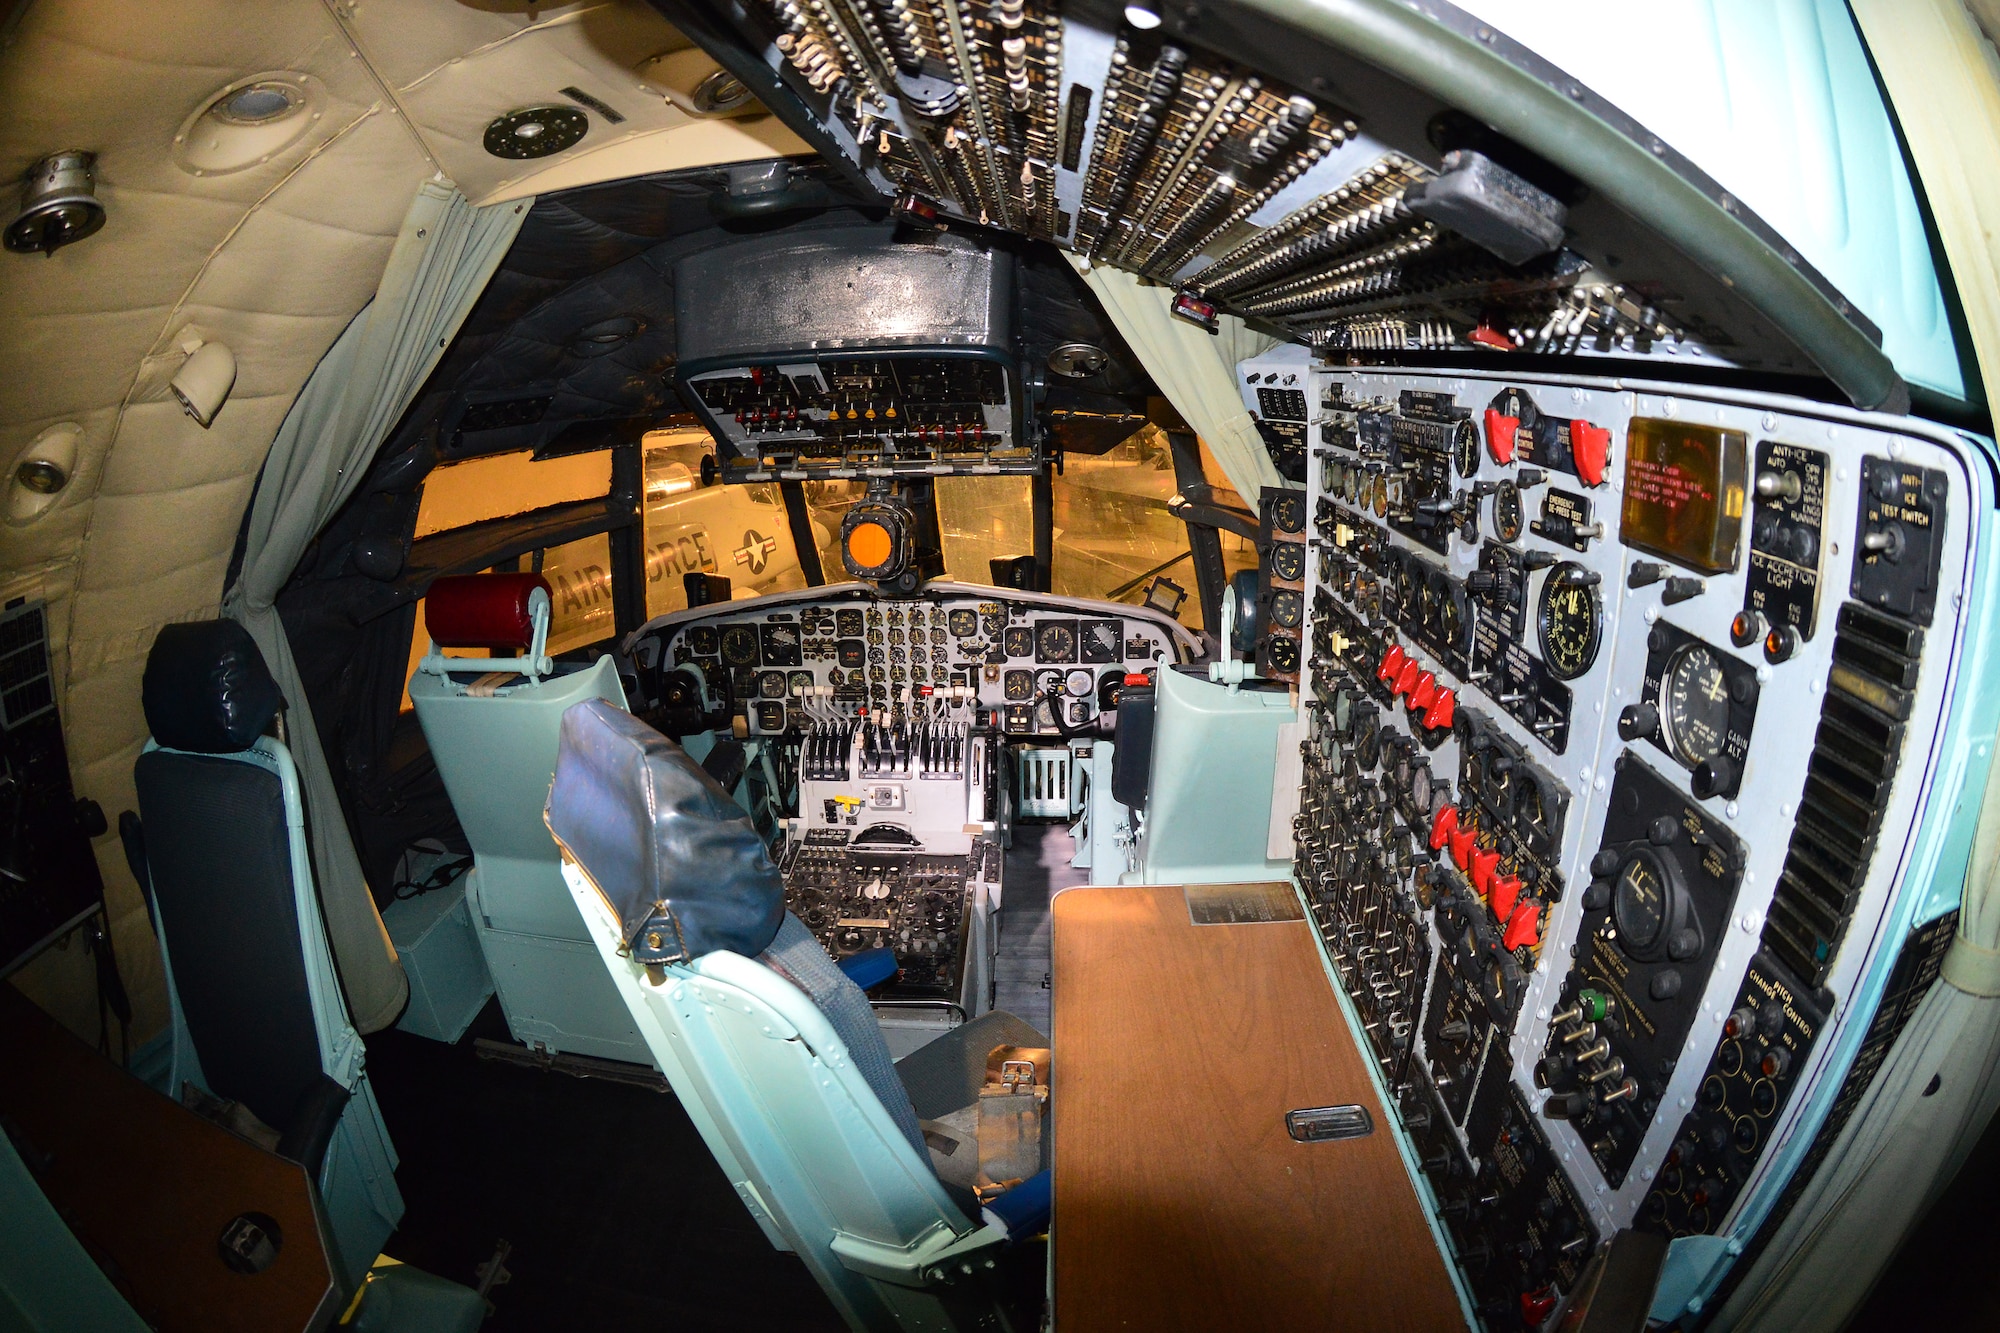 DAYTON, Ohio -- Douglas C-133A Cargomaster flight deck in the Cold War Gallery at the National Museum of the United States Air Force. (U.S. Air Force photo by Ken LaRock)